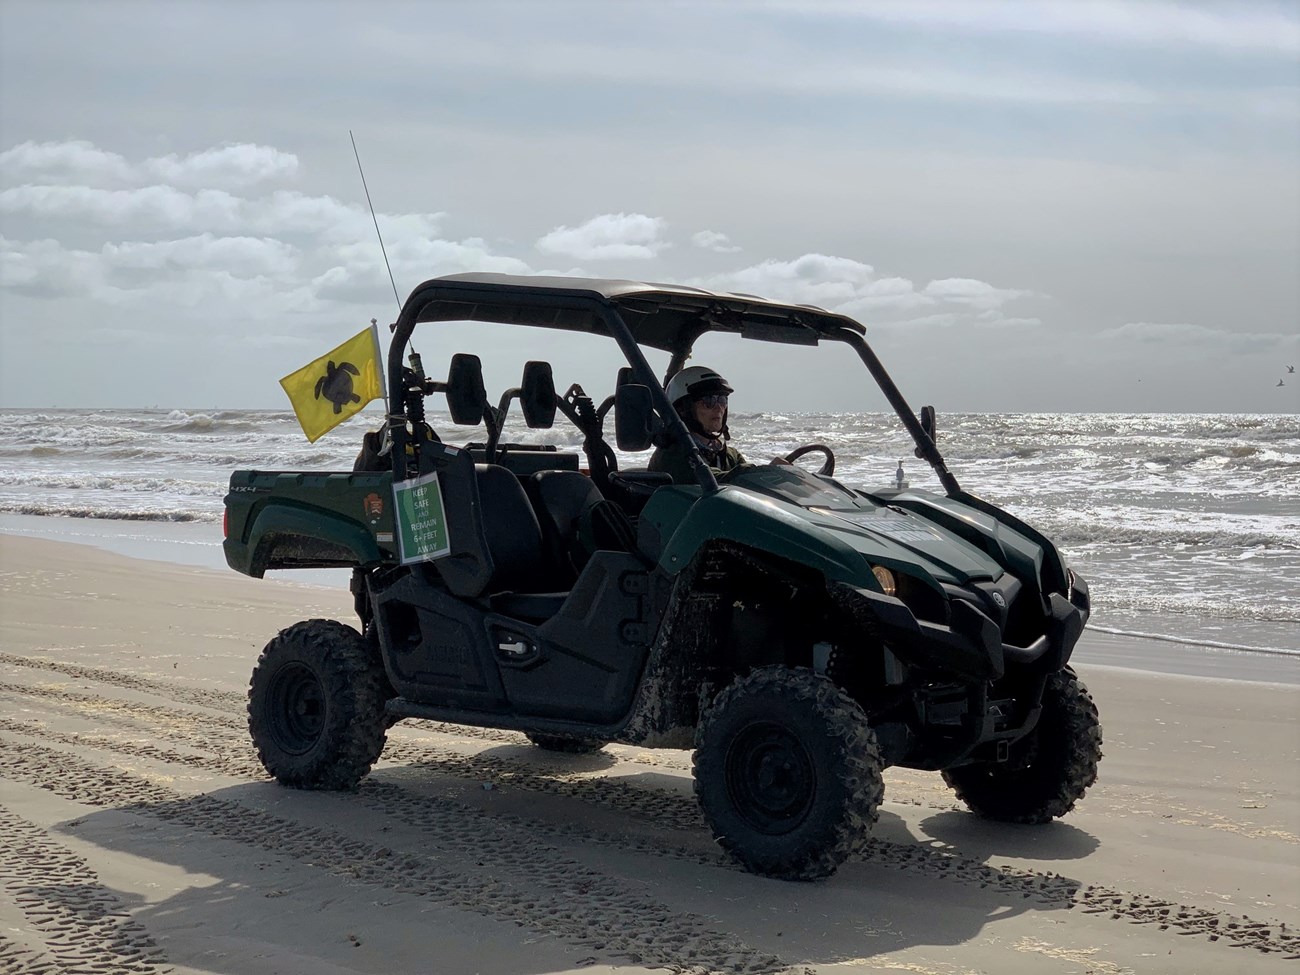 An UTV driving on the beach with a small bright yellow flag with a black silhouette of a sea turtle.